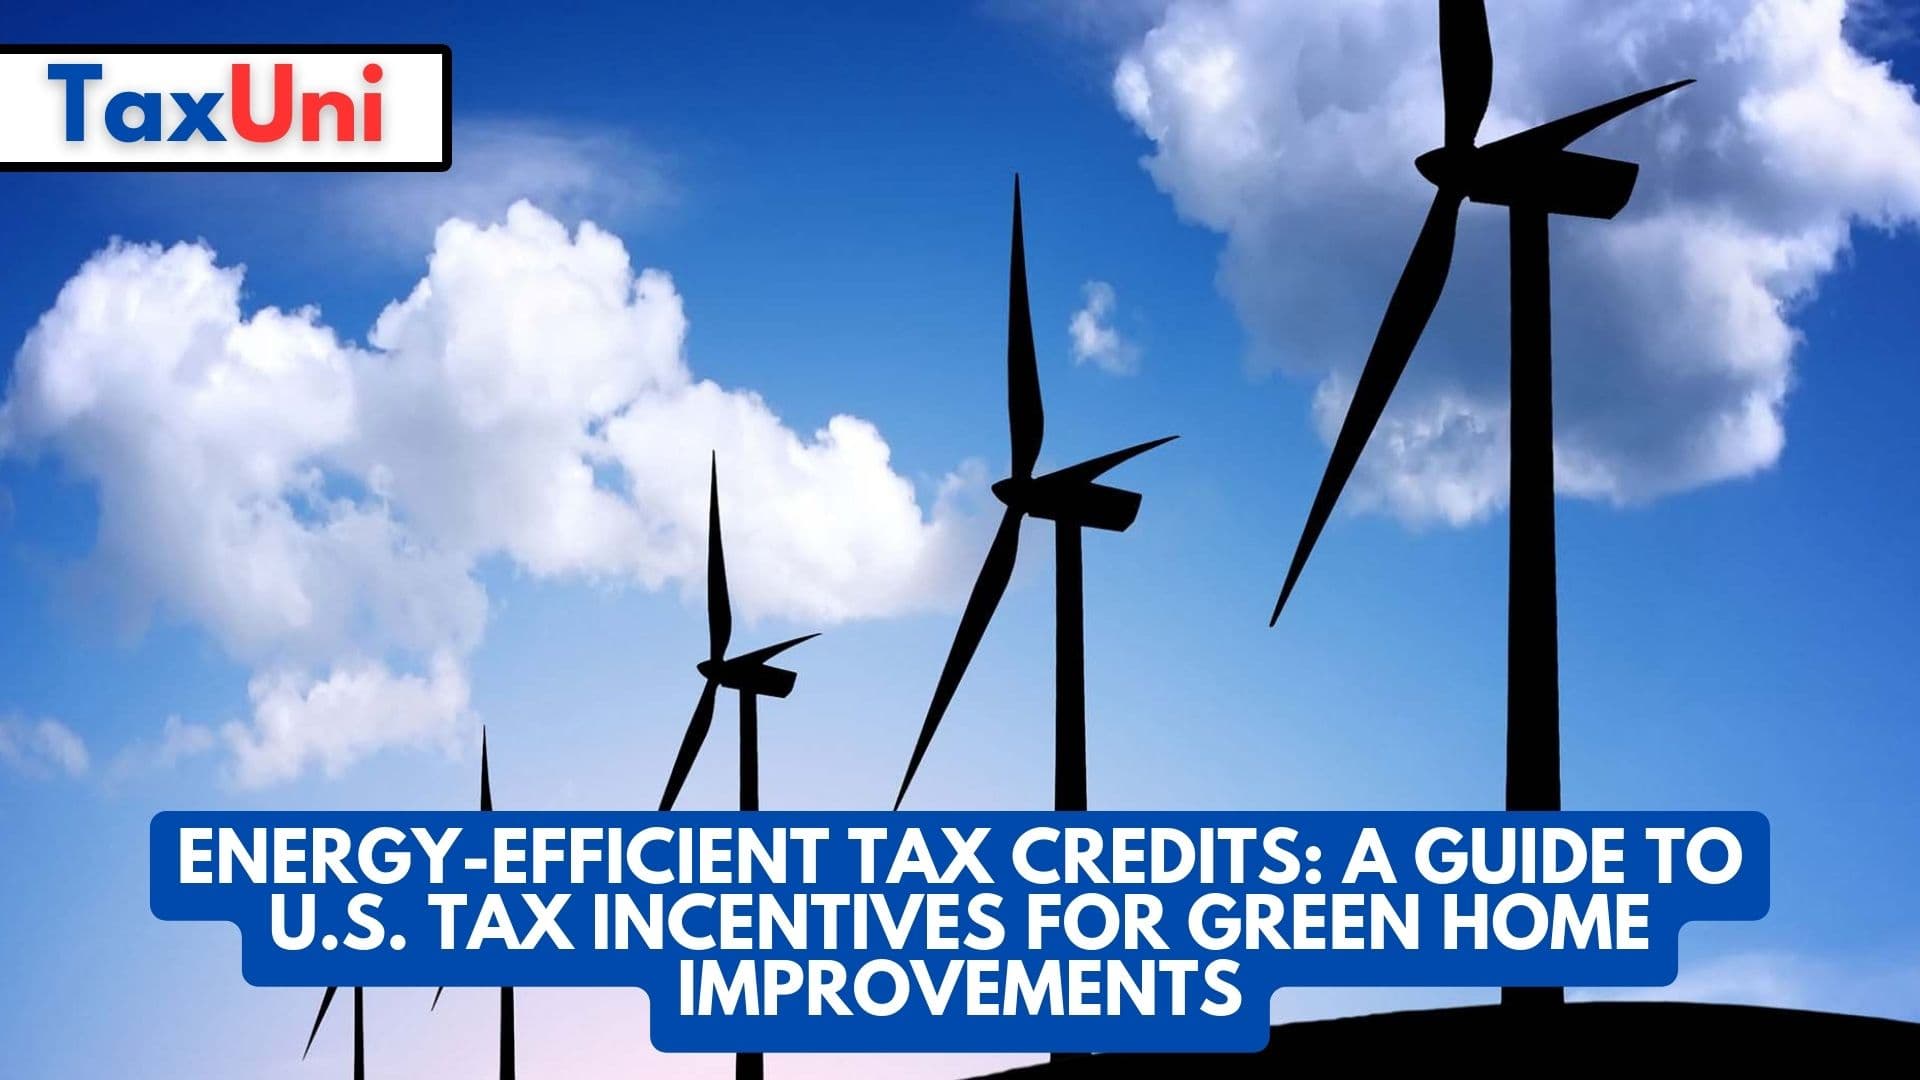 Energy-Efficient Tax Credits A Guide to U.S. Tax Incentives for Green Home Improvements